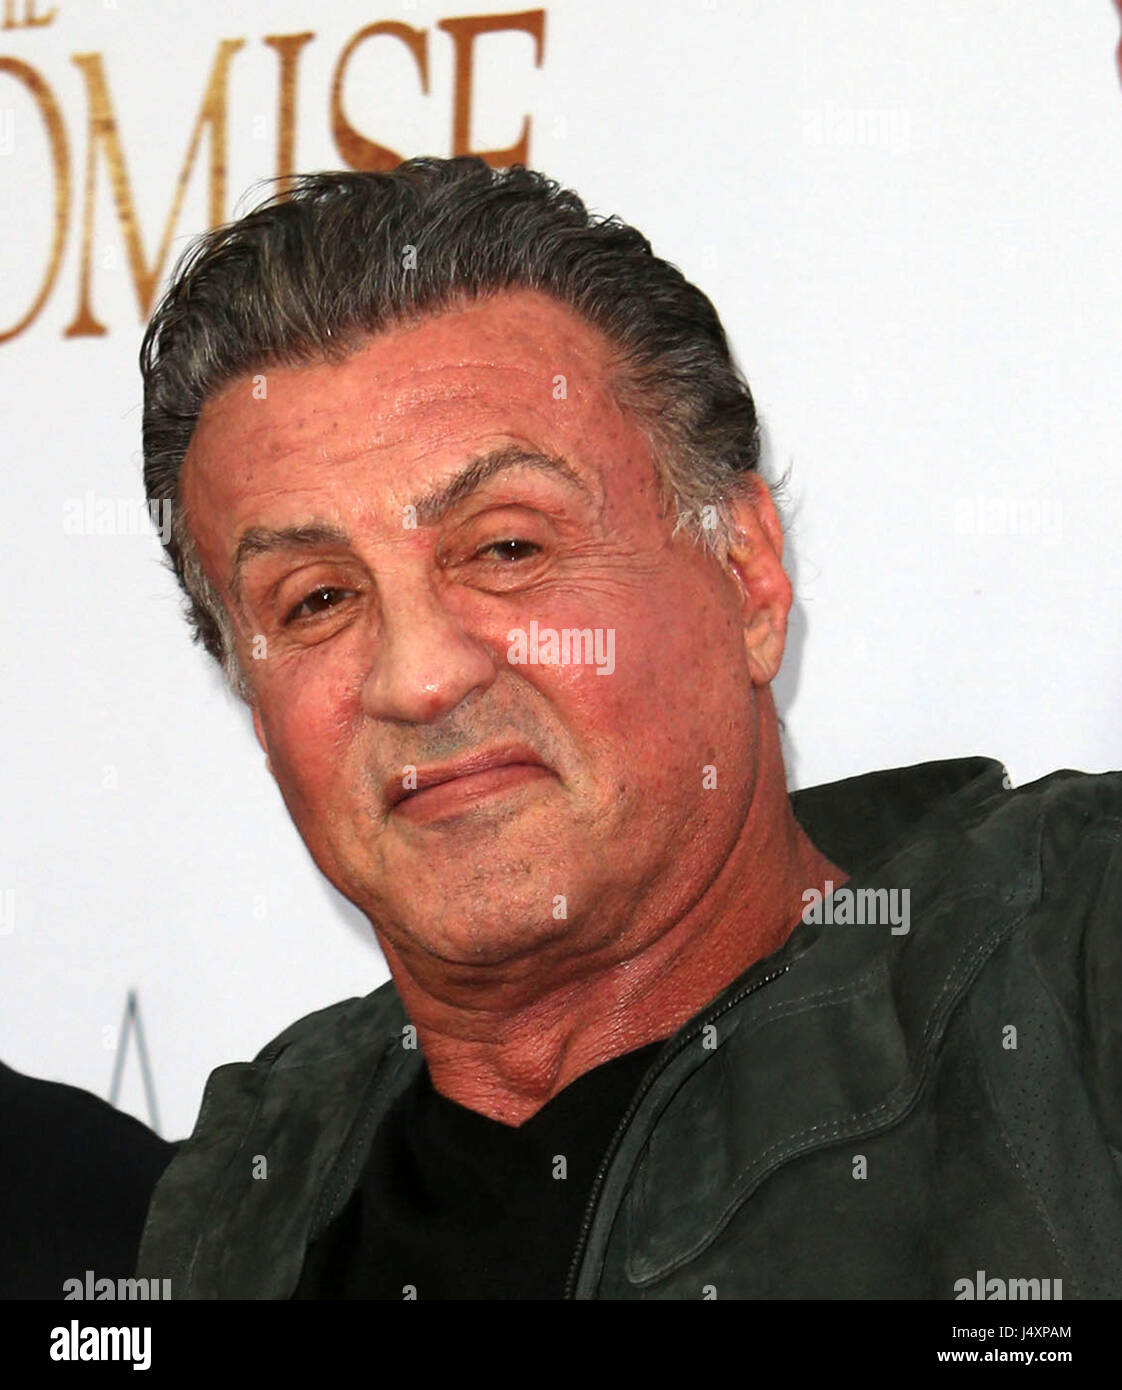 Premiere of Open Road Films' 'The Promise' - Arrivals  Featuring: Sylvester Stallone Where: Hollywood, California, United States When: 13 Apr 2017 Credit: FayesVision/WENN.com Stock Photo